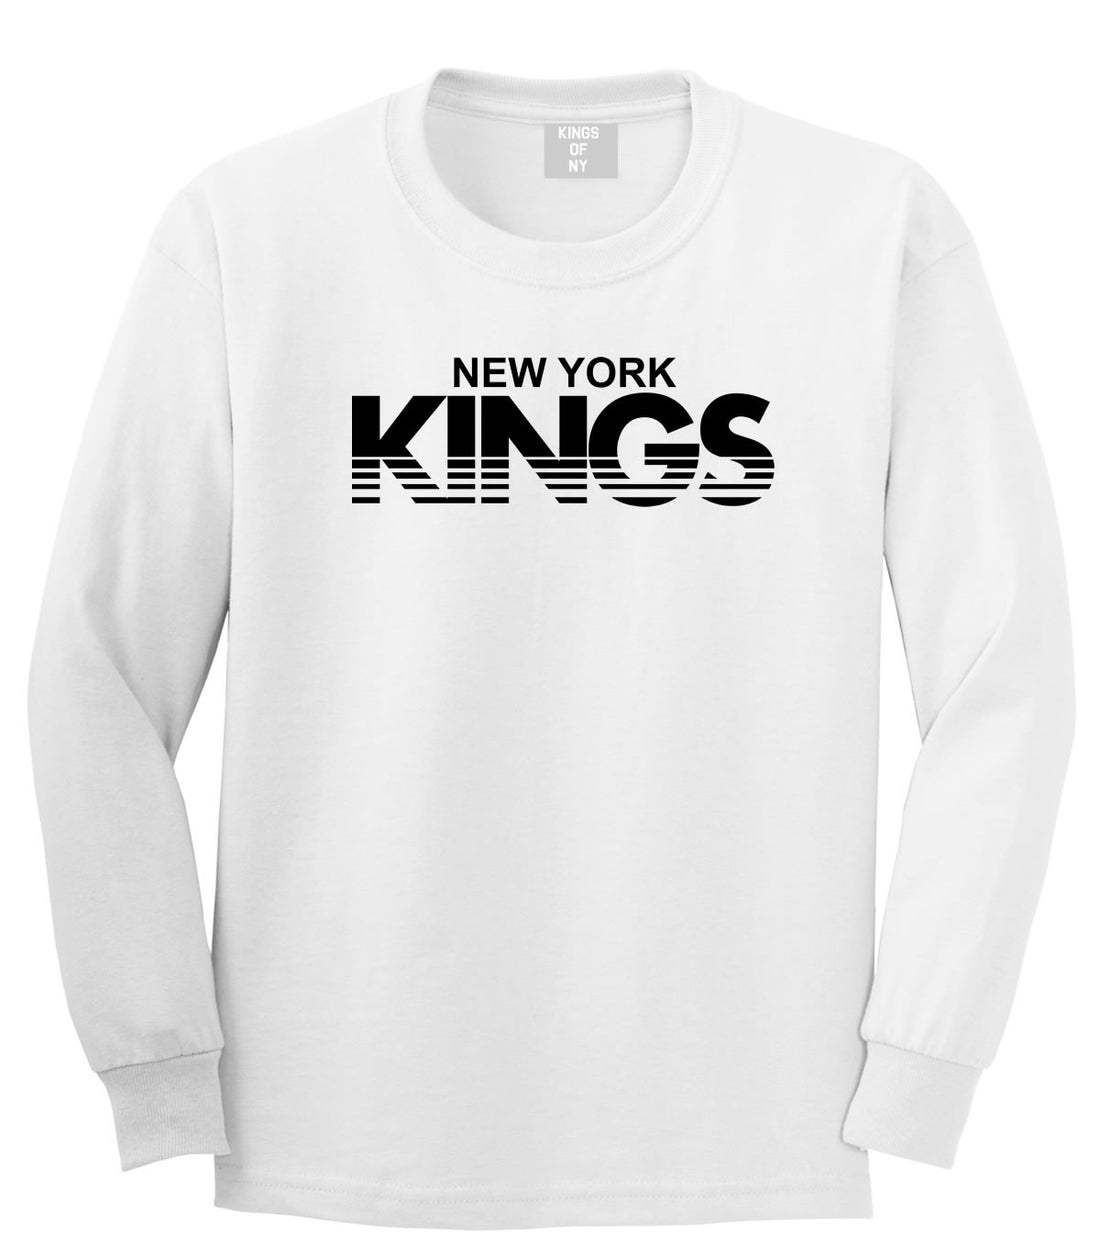 New York Kings Racing Style Boys Kids Long Sleeve T-Shirt in White by Kings Of NY